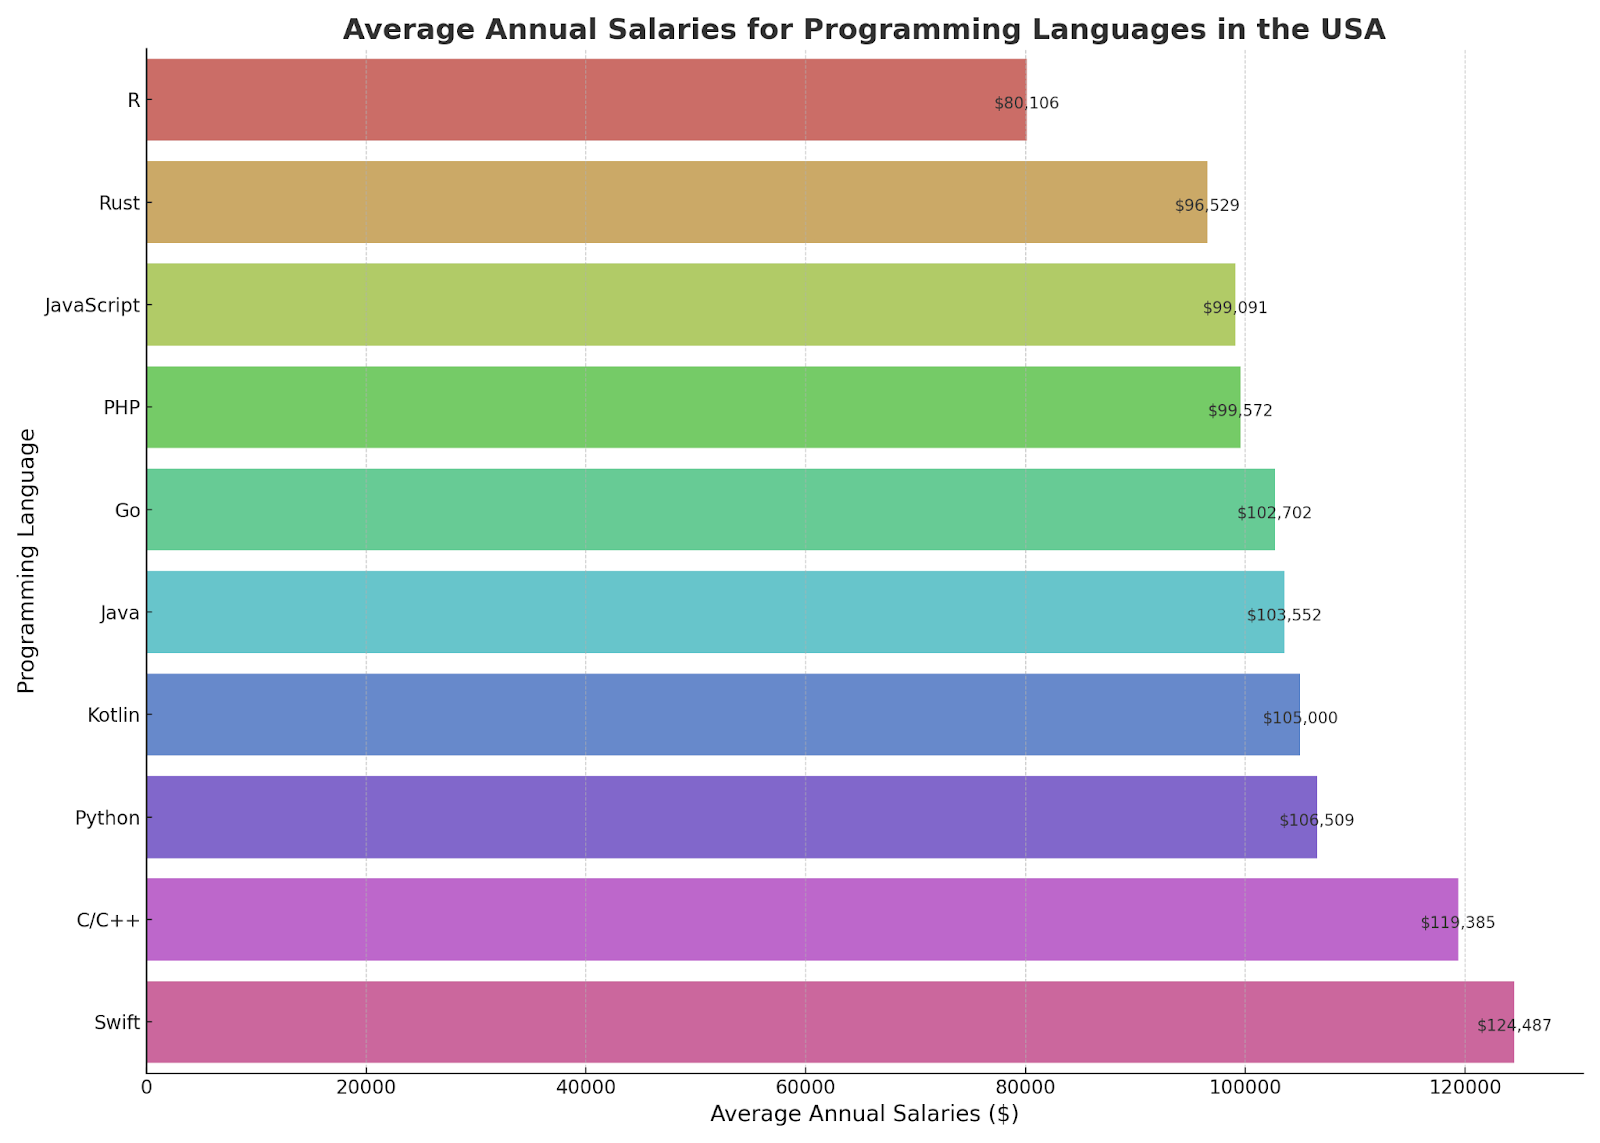 Average Annual Salaries for Programmers in the USA